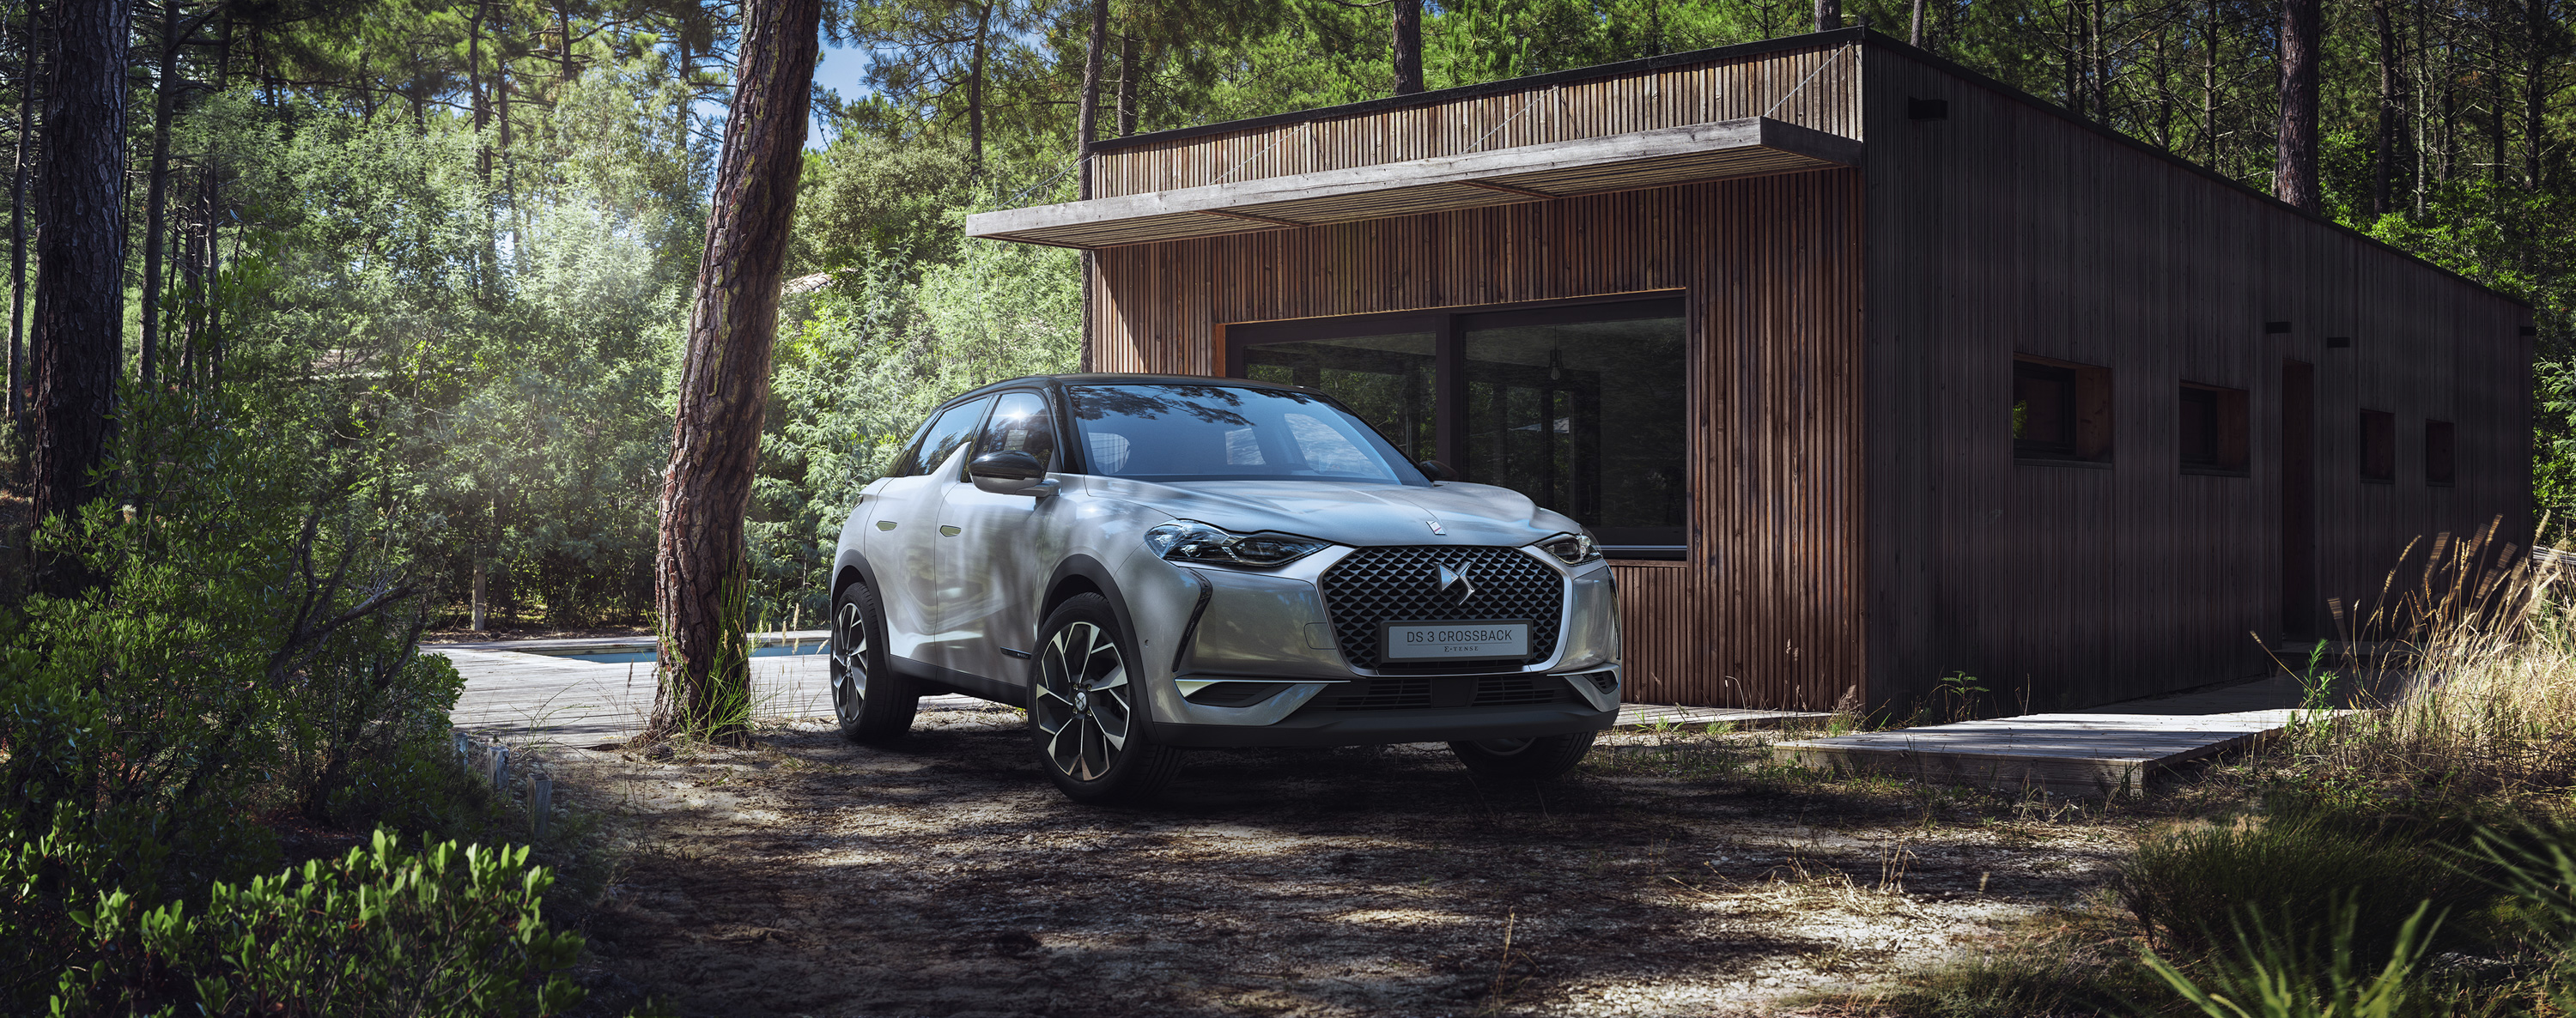 DS3 Crossback Picture, Photo, Wallpaper